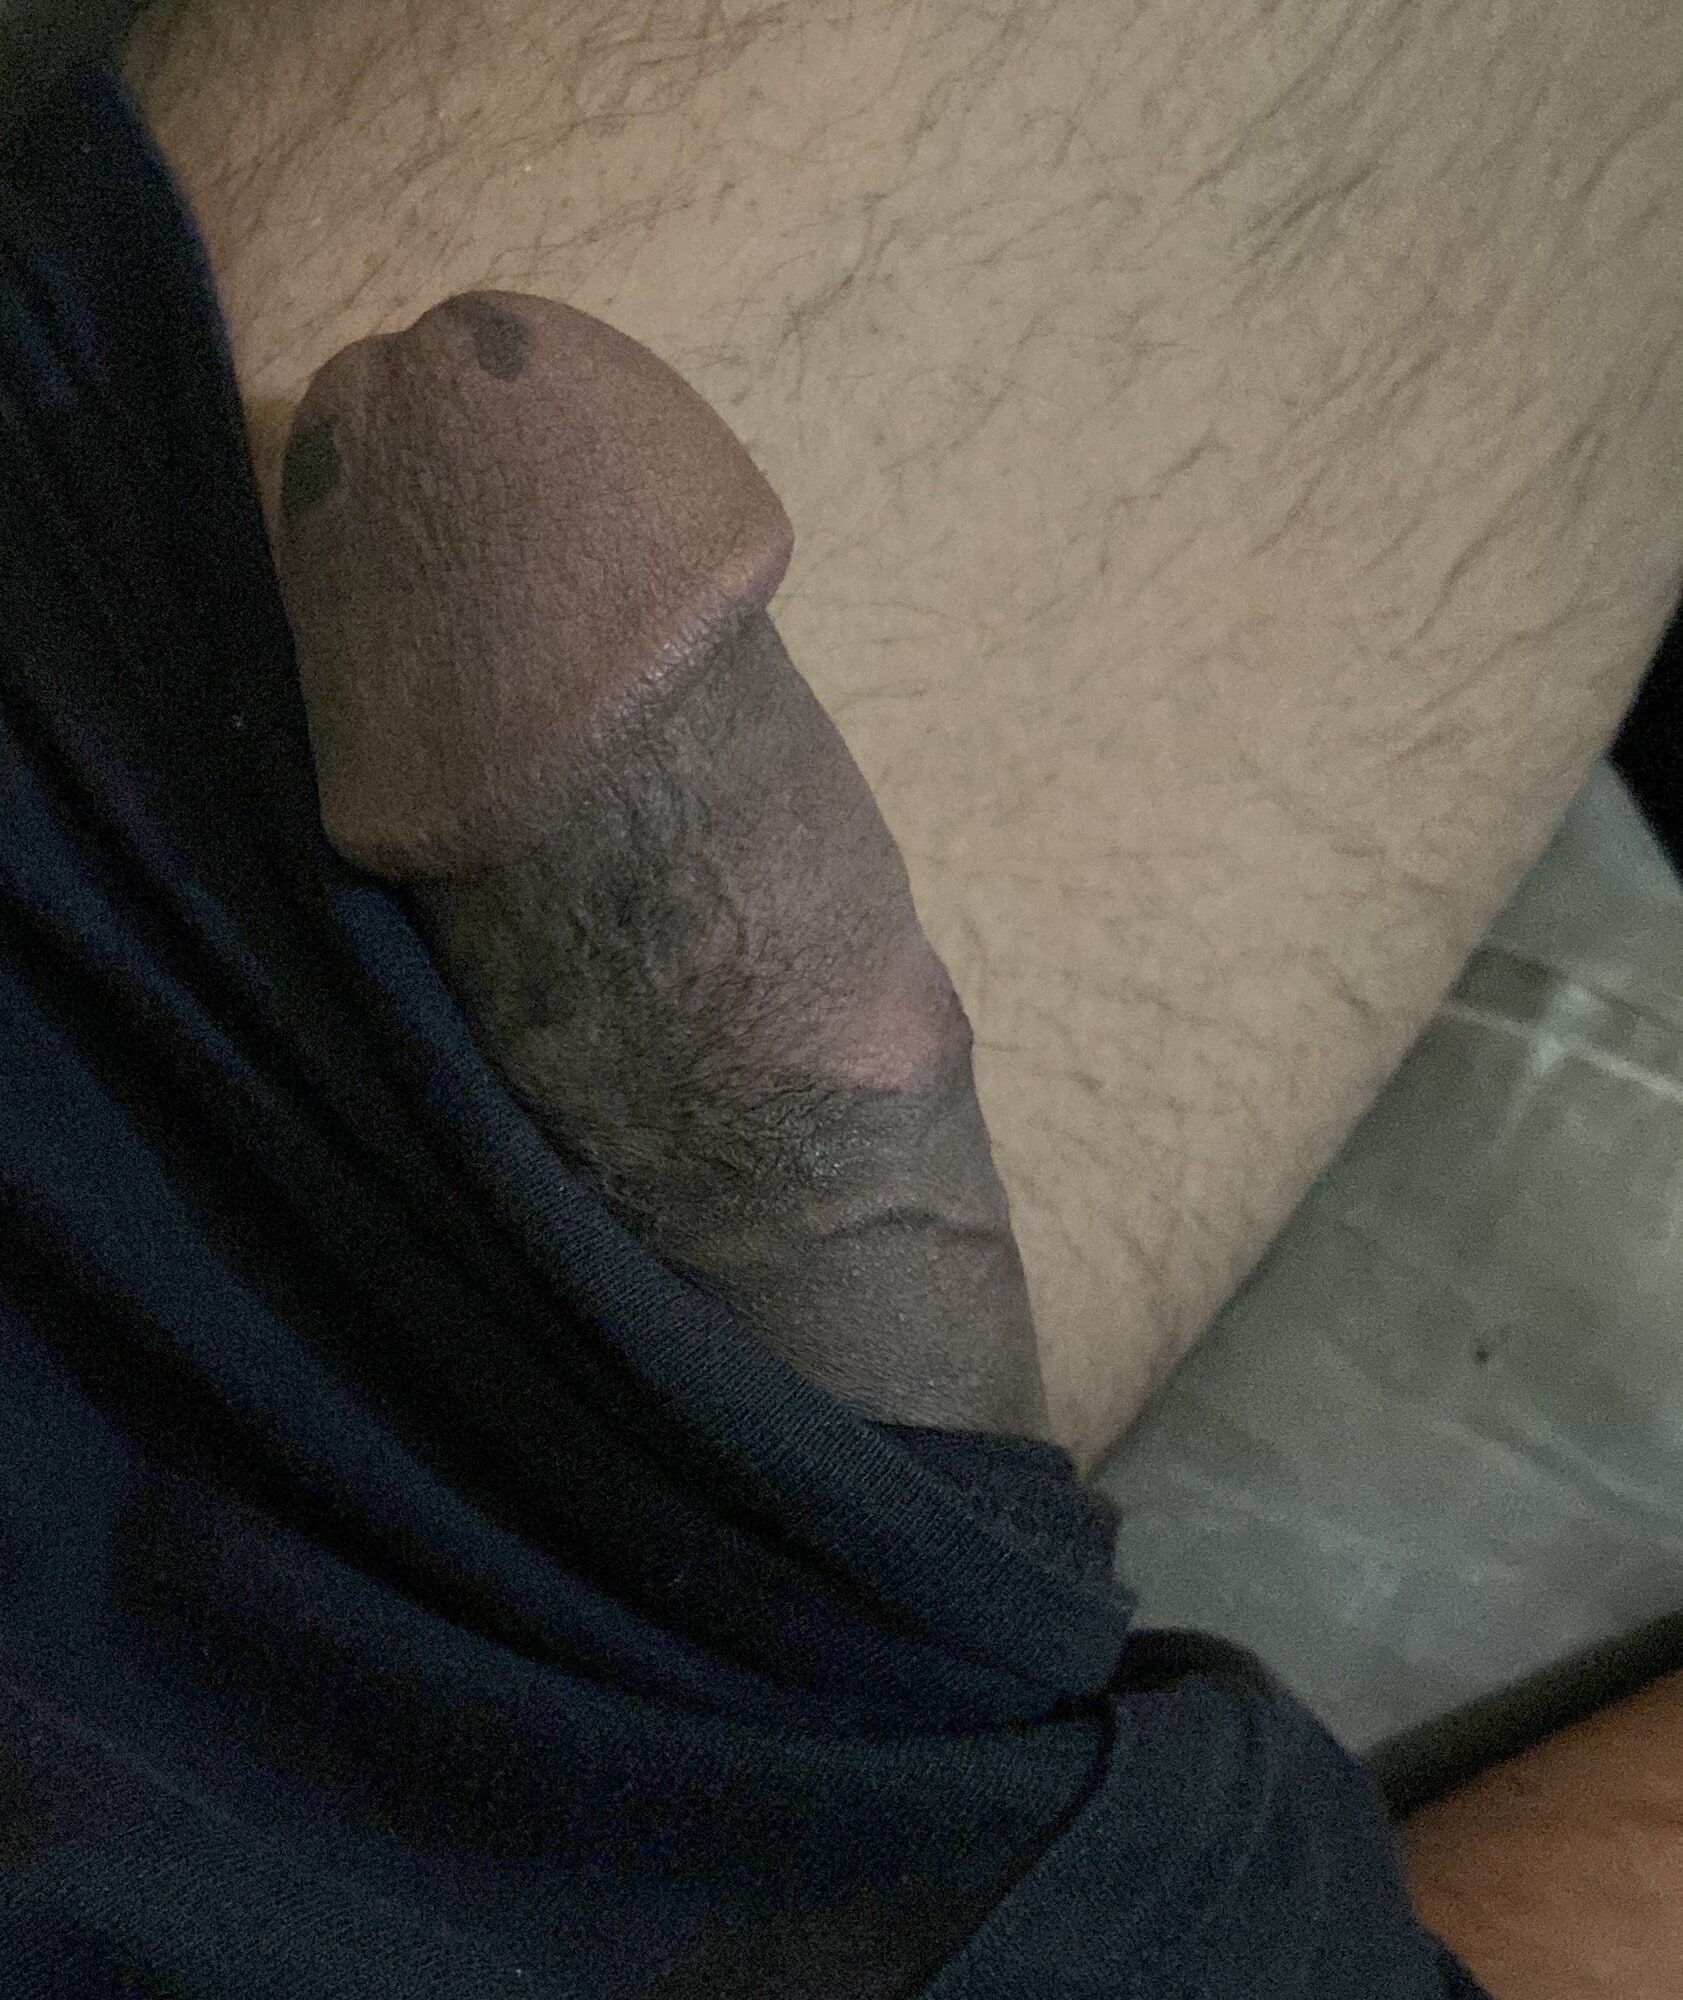 I Love my husband's cock very much #2